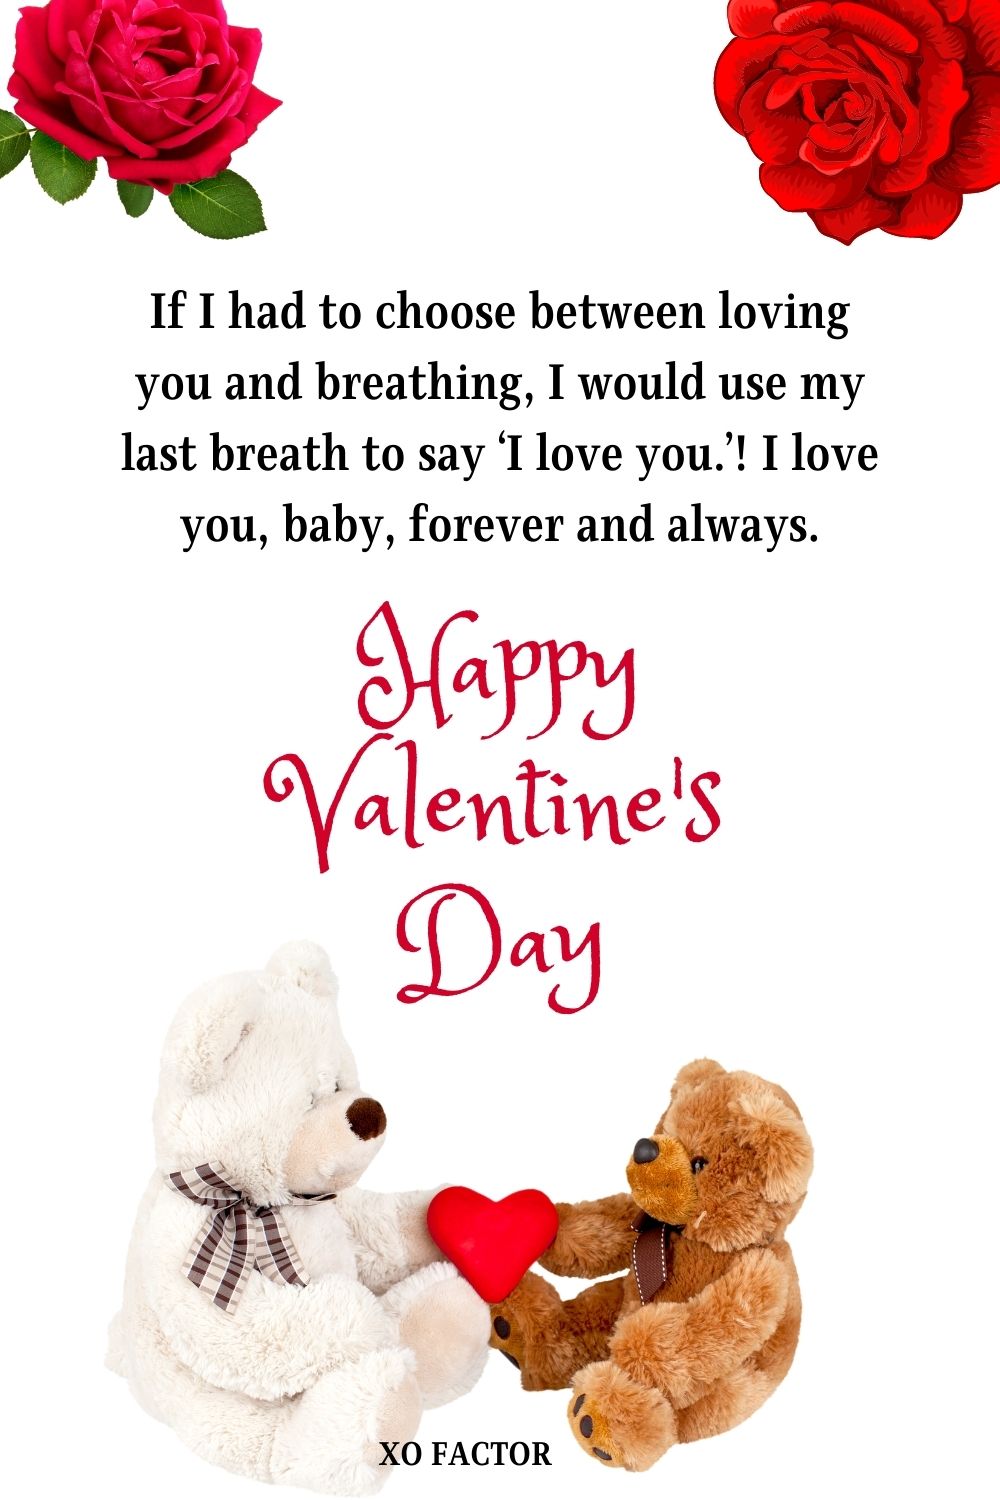 If I had to choose between loving you and breathing, I would use my last breath to say ‘I love you.’! I love you, baby, forever and always. Happy Valentine’s Day!